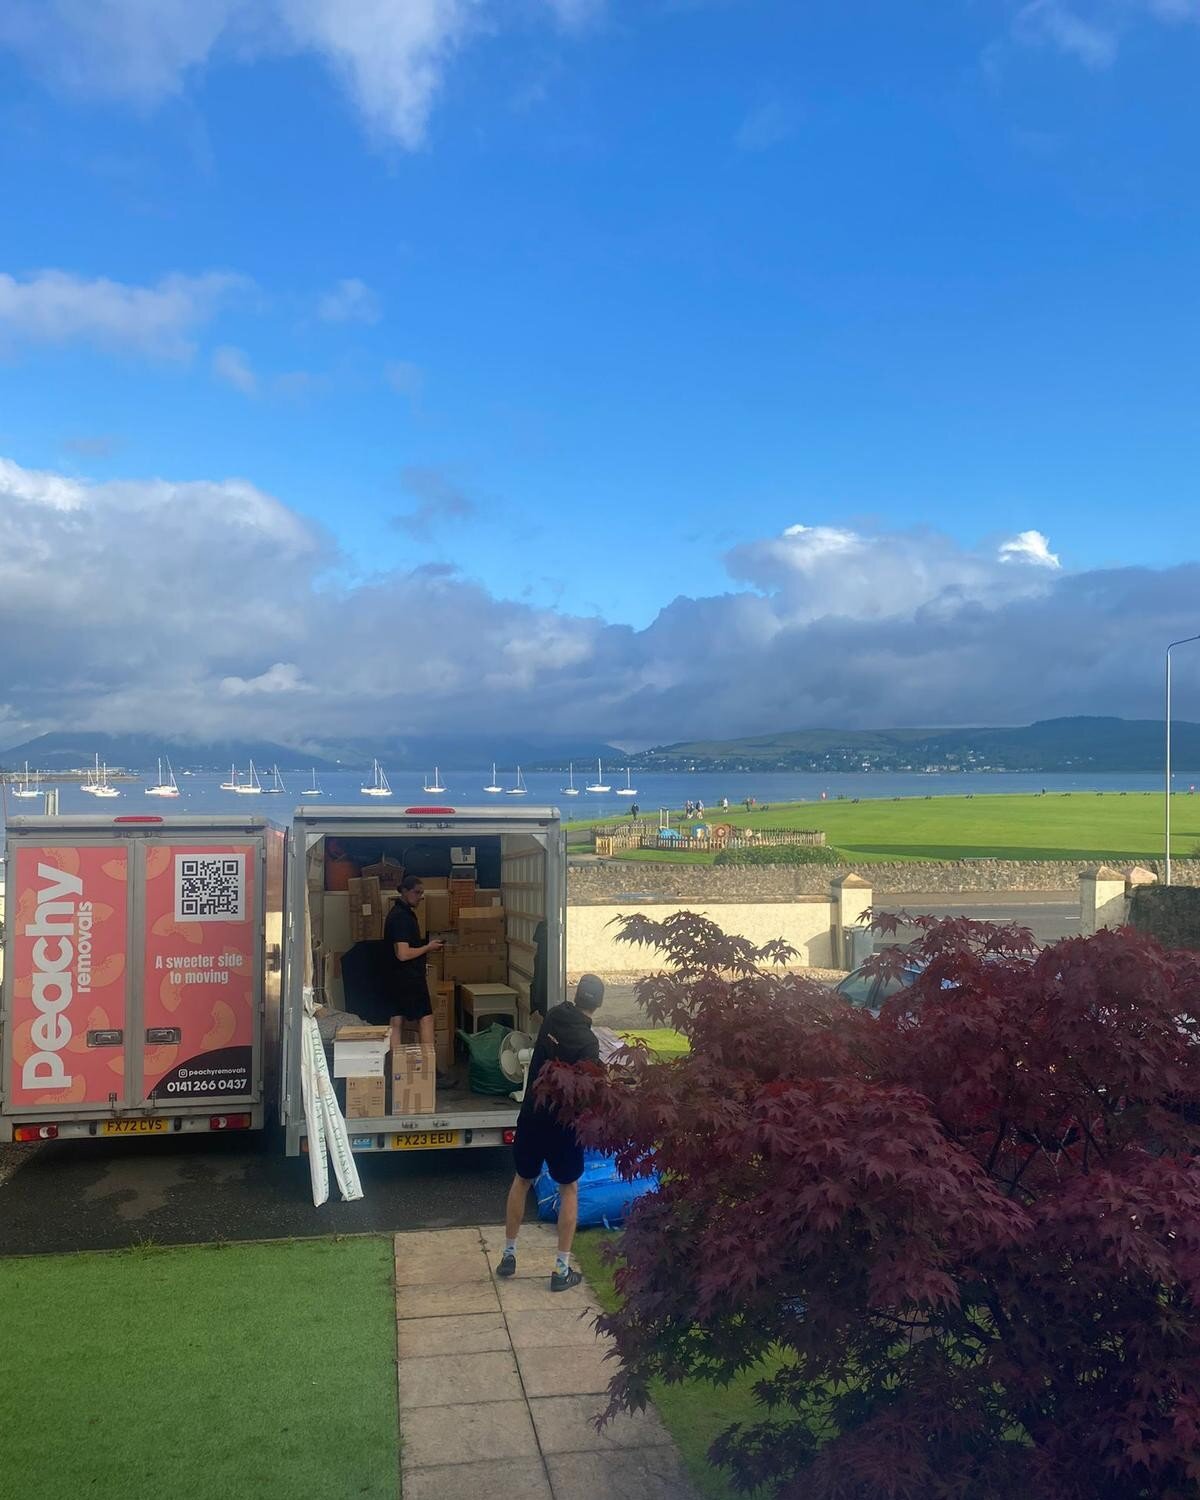 Van packing view of the week 👌 That's tasty 🏞️👀🍑
.
.
.
.
.
#housemove #removals #removalscompany #professionalmovers #peachy #movingandstorage #moversandpackers #packing #movers #moving #movingday #movingcompany #movinghouse #relocation #relocati